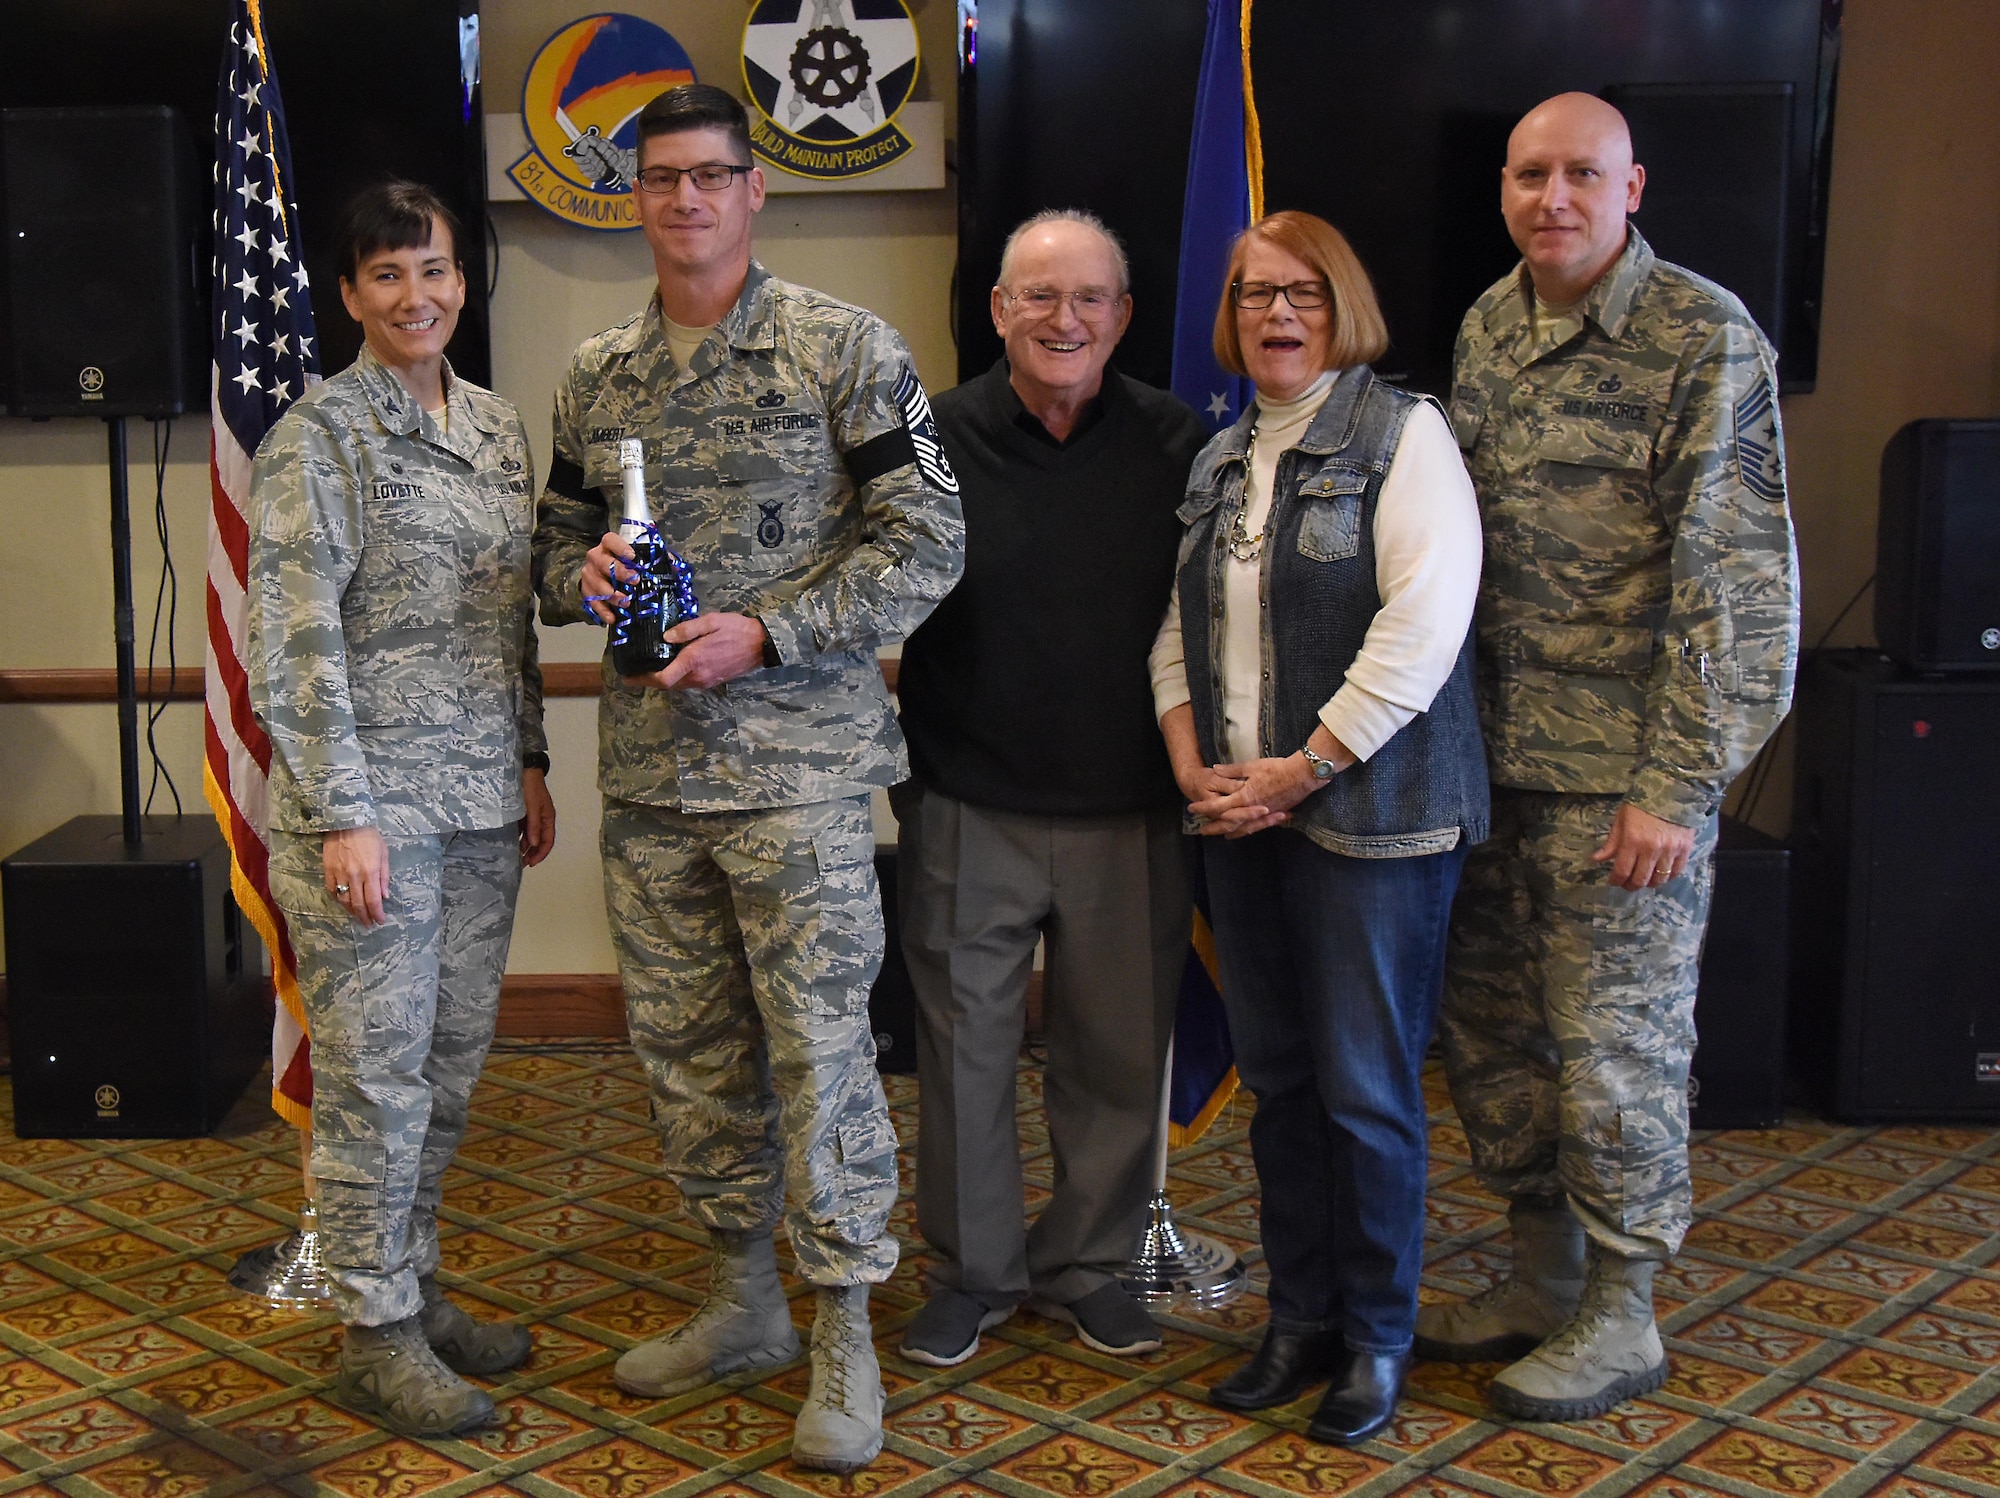 U.S. Air Force Col. Debra Lovette, 81st Training Wing commander, and Chief Master Sgt. David Pizzuto, 81st TRW command chief, present Senior Master Sgt. Kevin Lambert, 81st Security Forces Squadron operations superintendent, and his family with a memento for his promotion to the rank of chief master sergeant at Keesler Air Force Base, Mississippi, Dec. 6, 2018. Five senior master sgts. at Keesler were selected for promotion. (U.S. Air Force photo by Kemberly Groue)